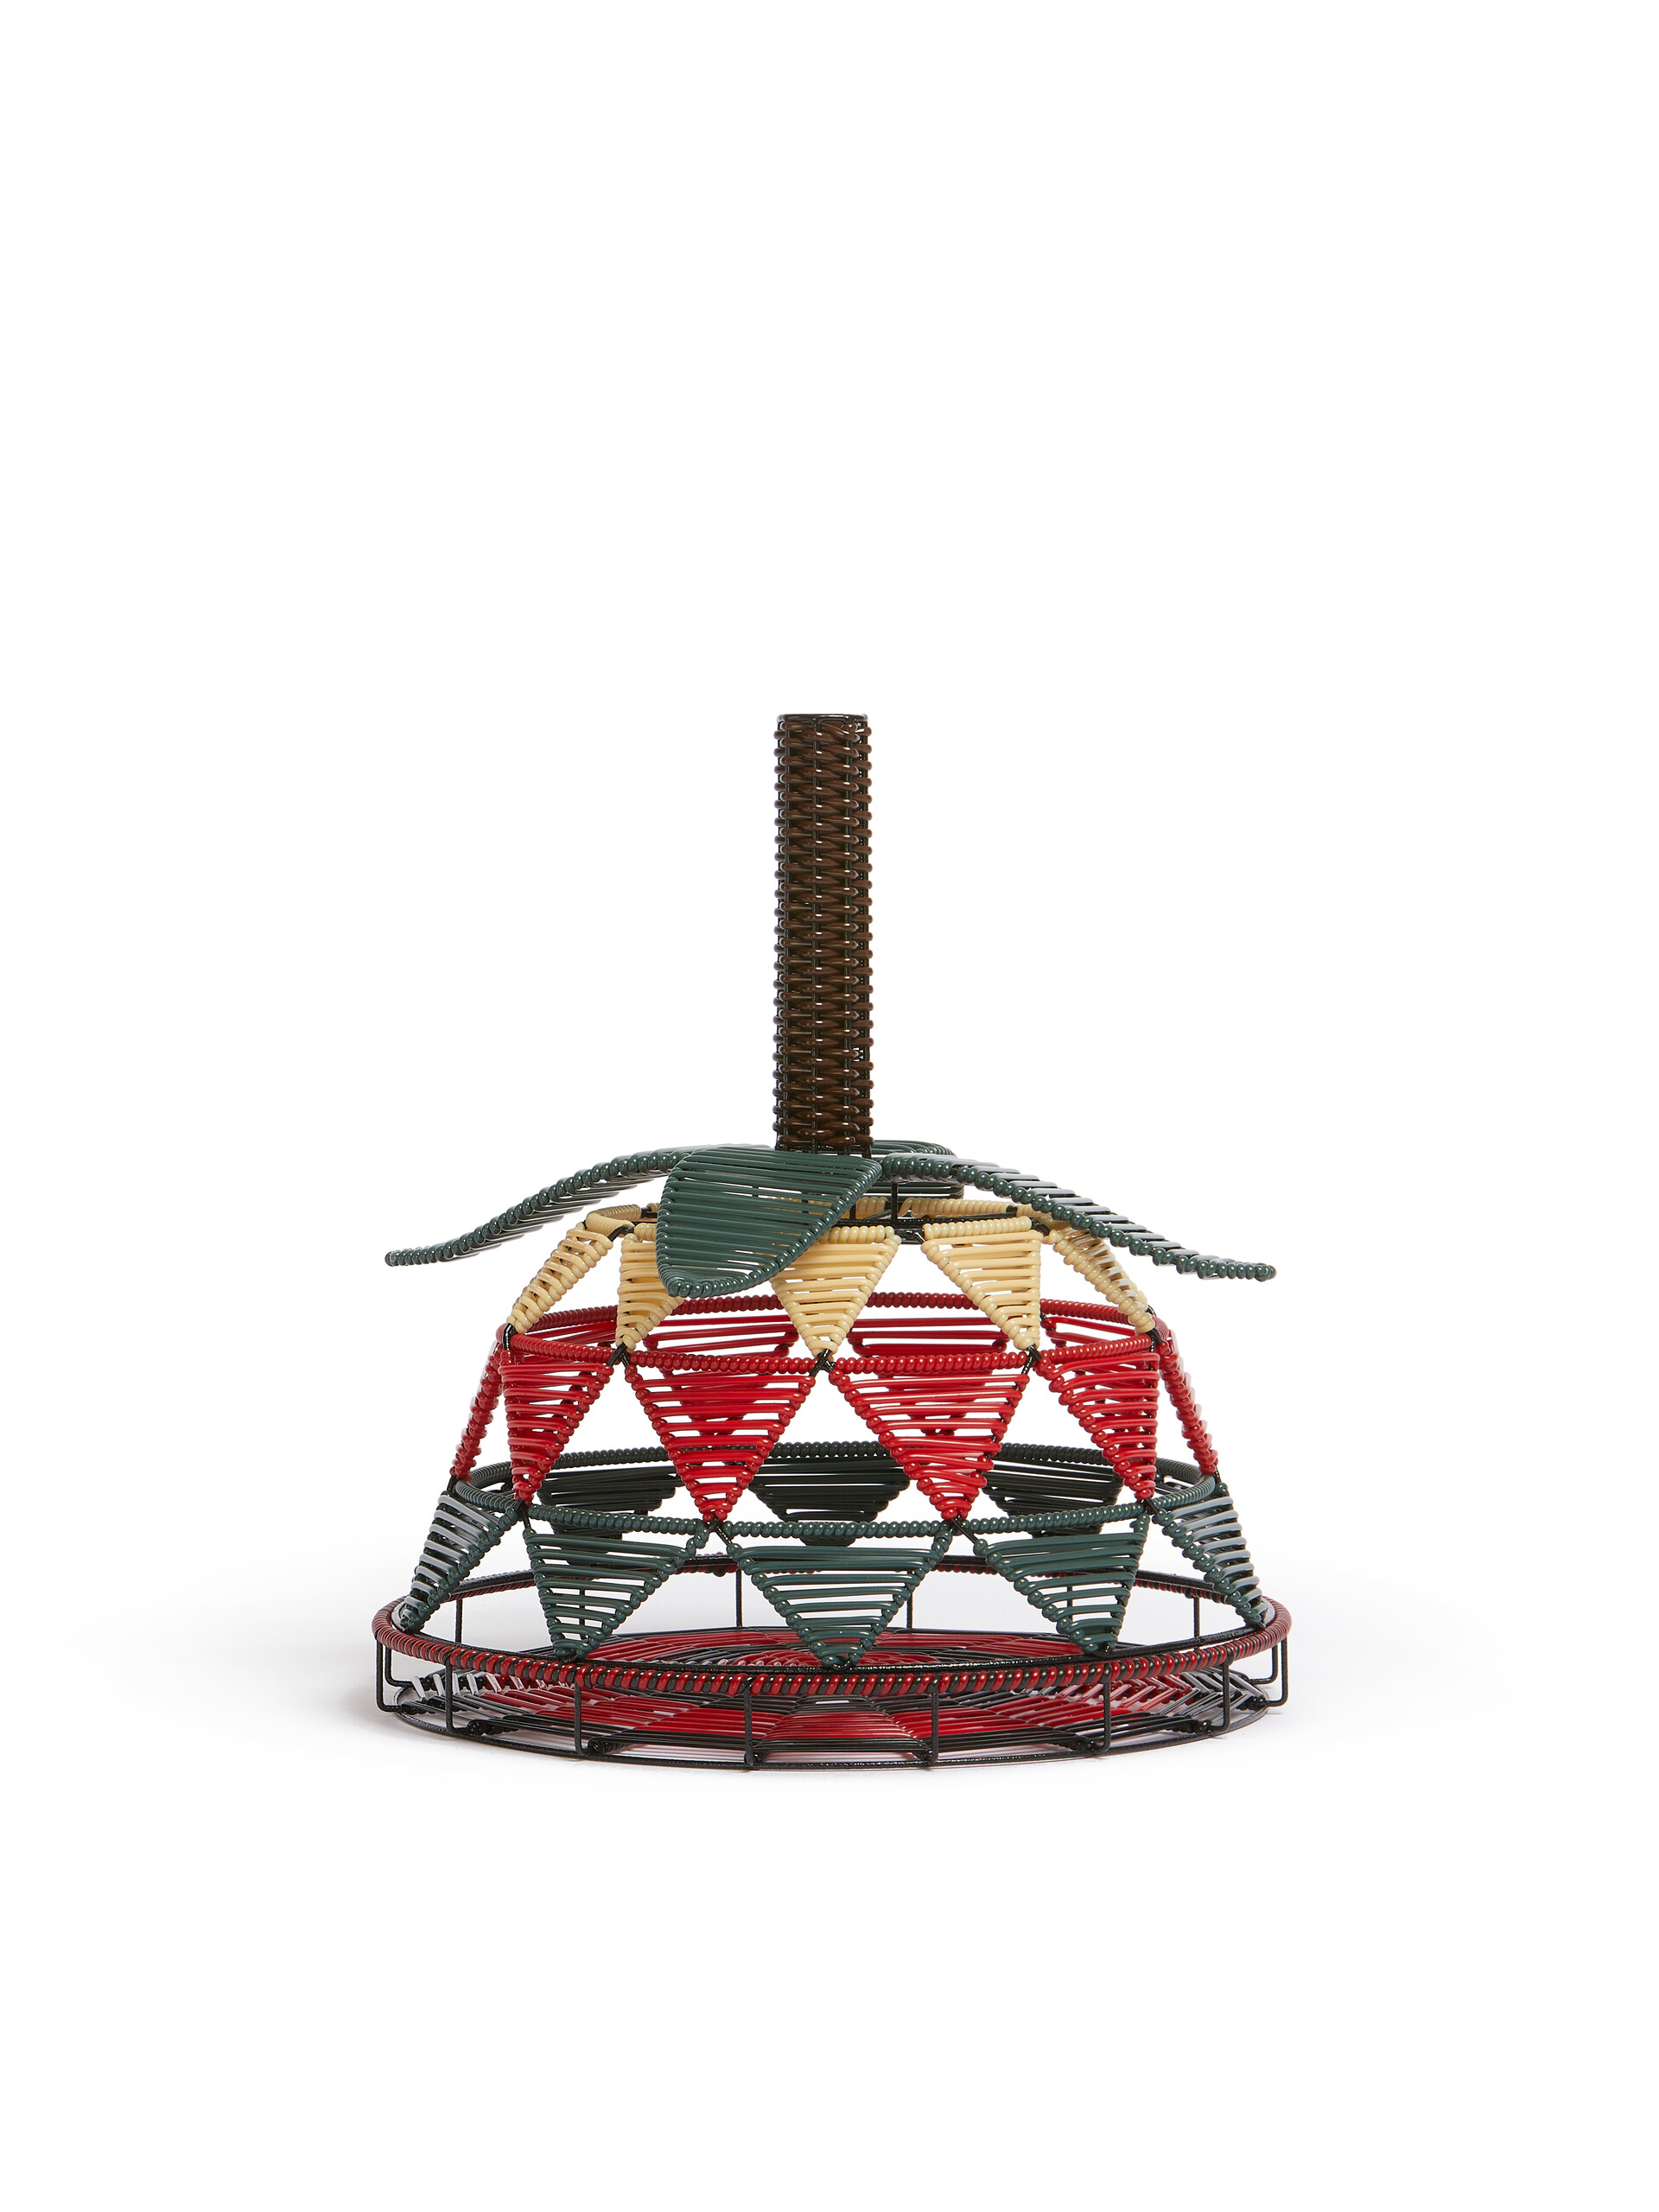 Green Red And Beige Marni Market Fruit Cloche - Accessories - Image 2